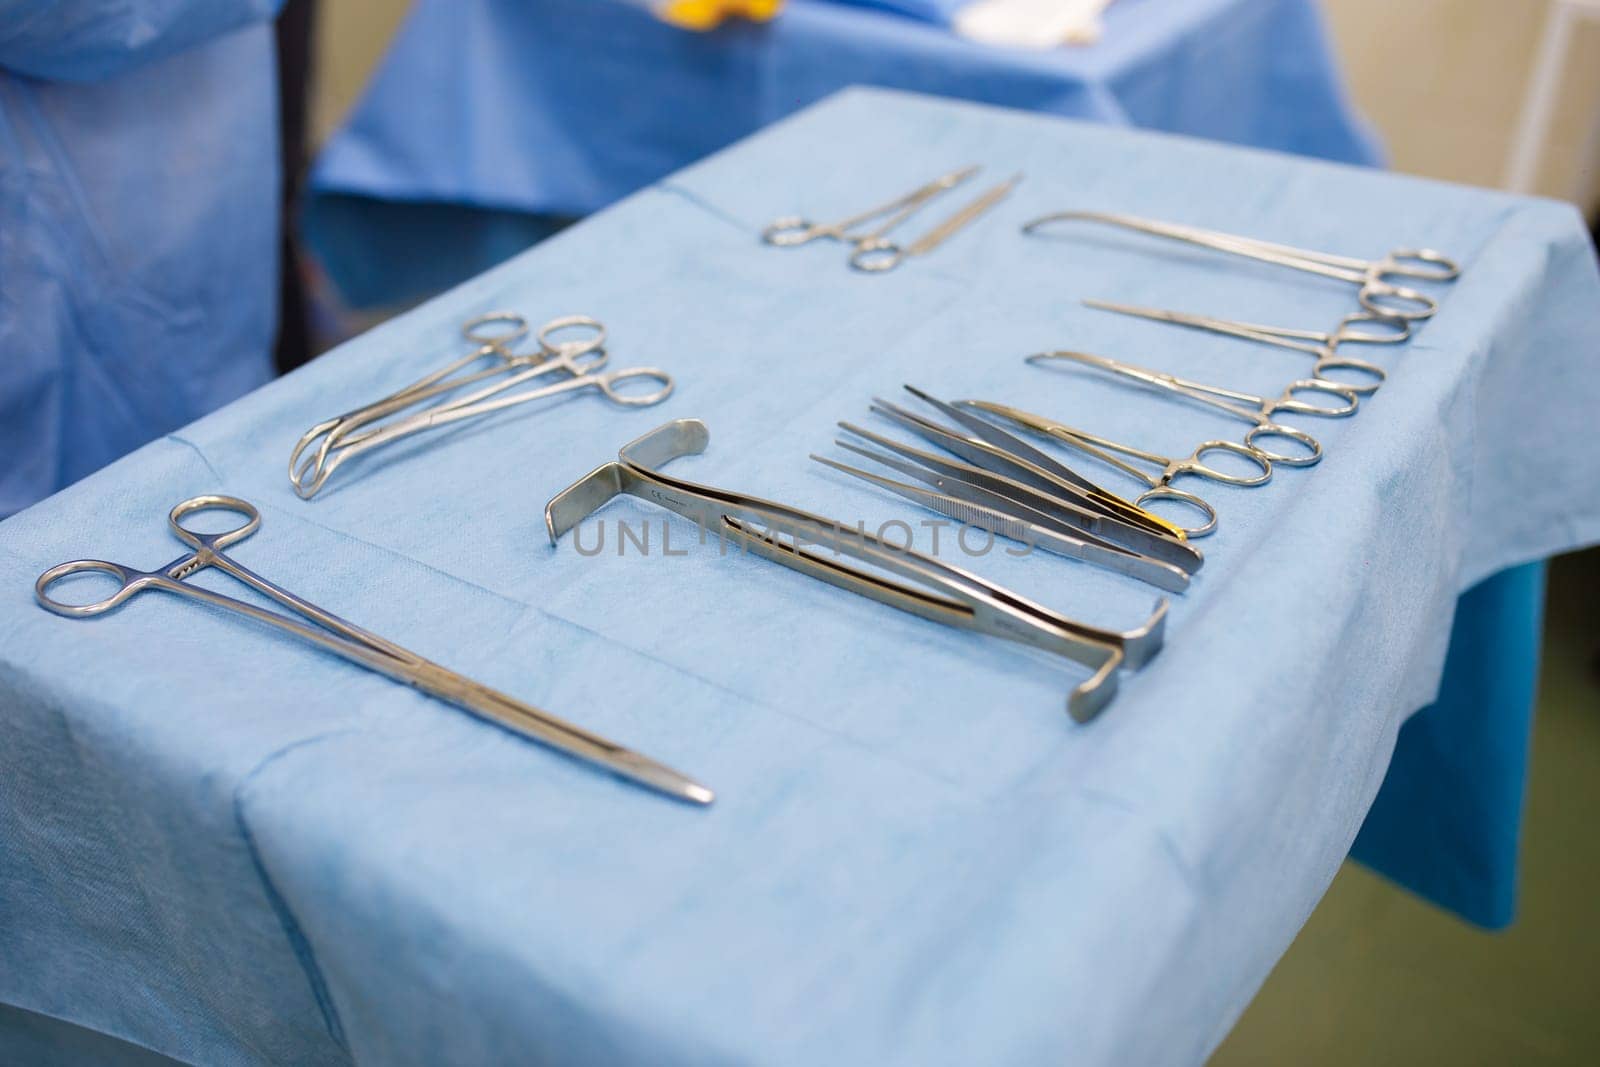 sterile instruments for surgery on a tray. High quality photo